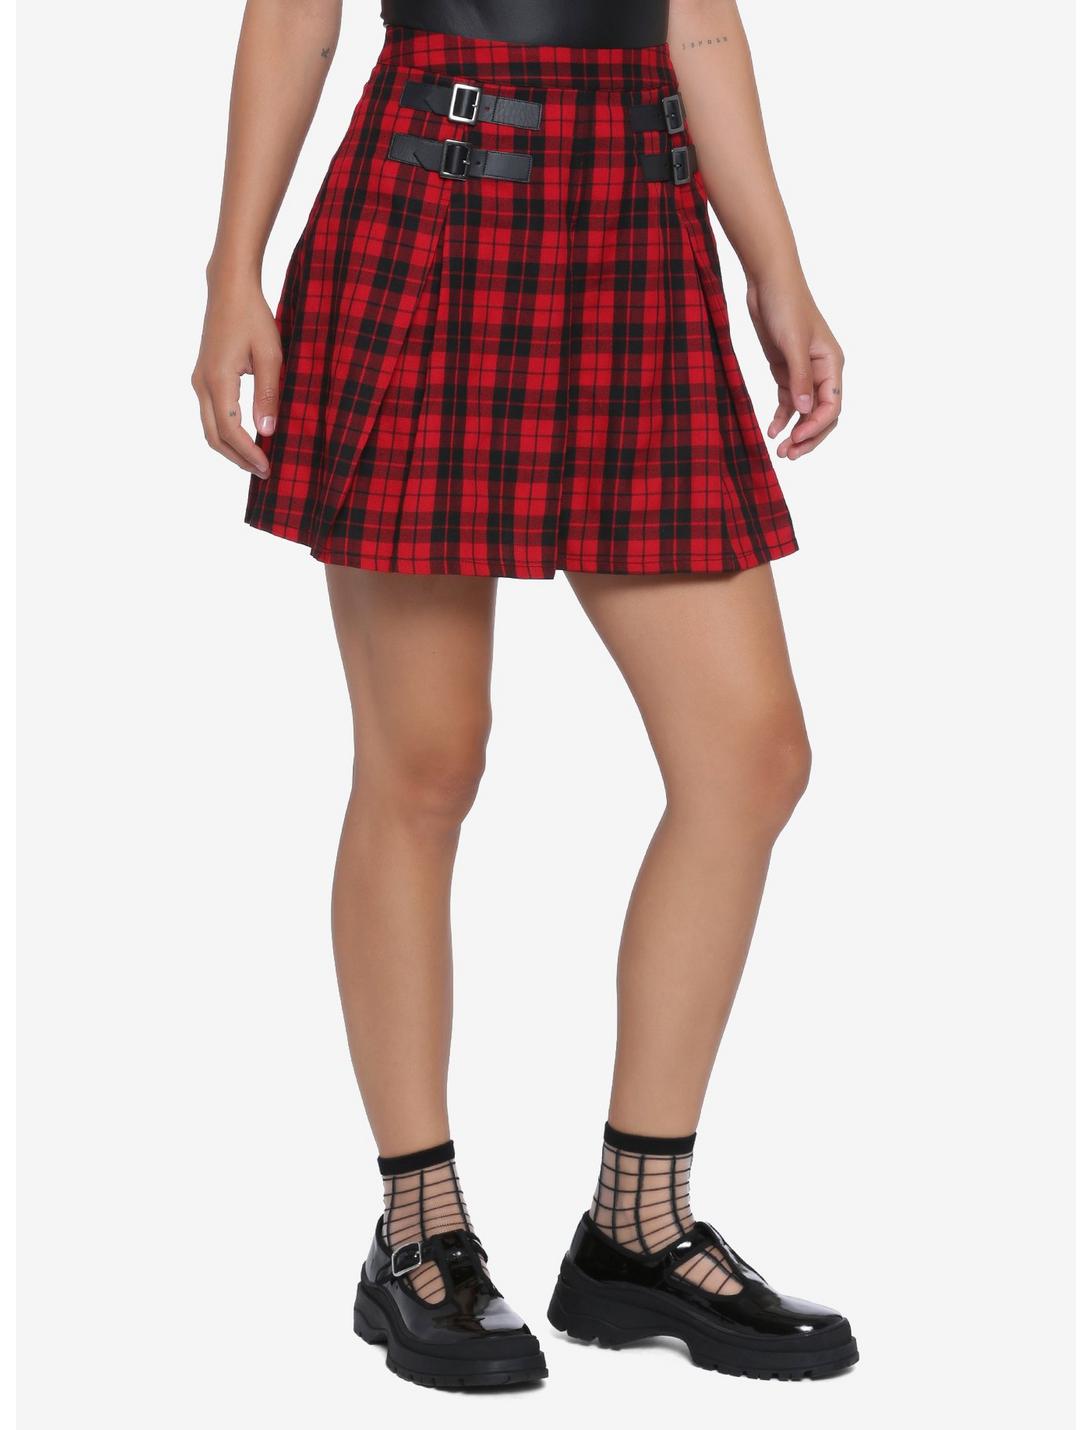 Red & Black Buckles Plaid Skirt | Hot Topic